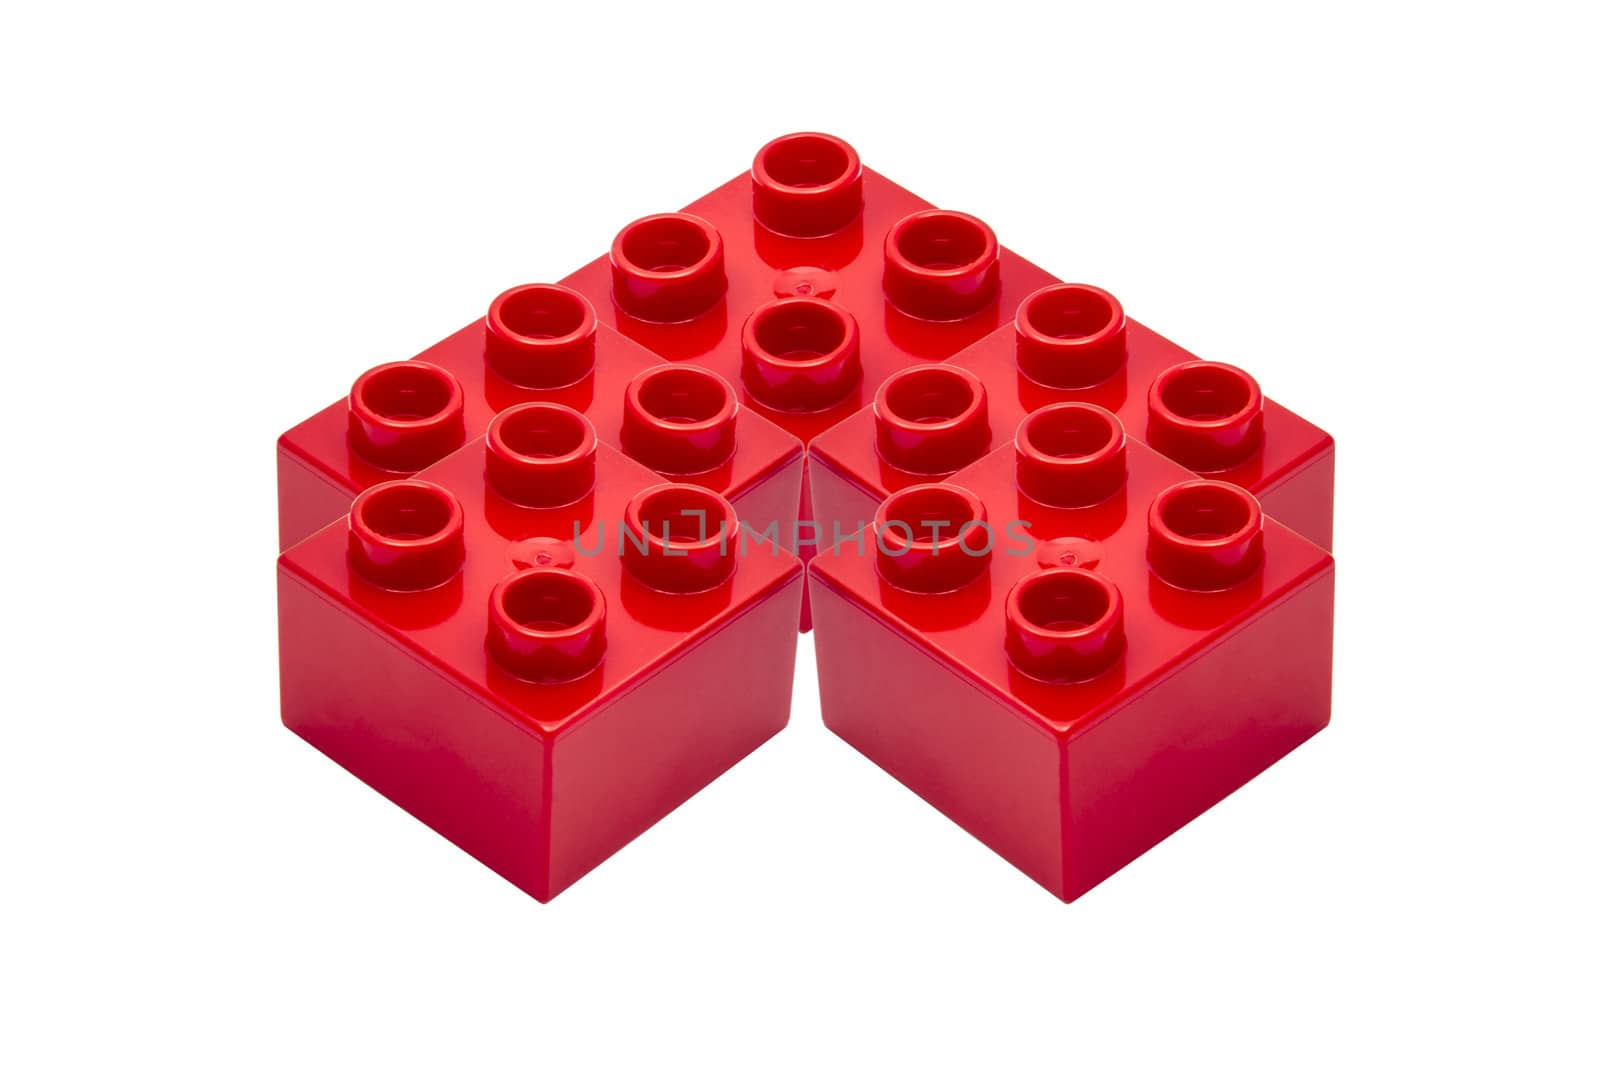 Red building blocks by ibphoto